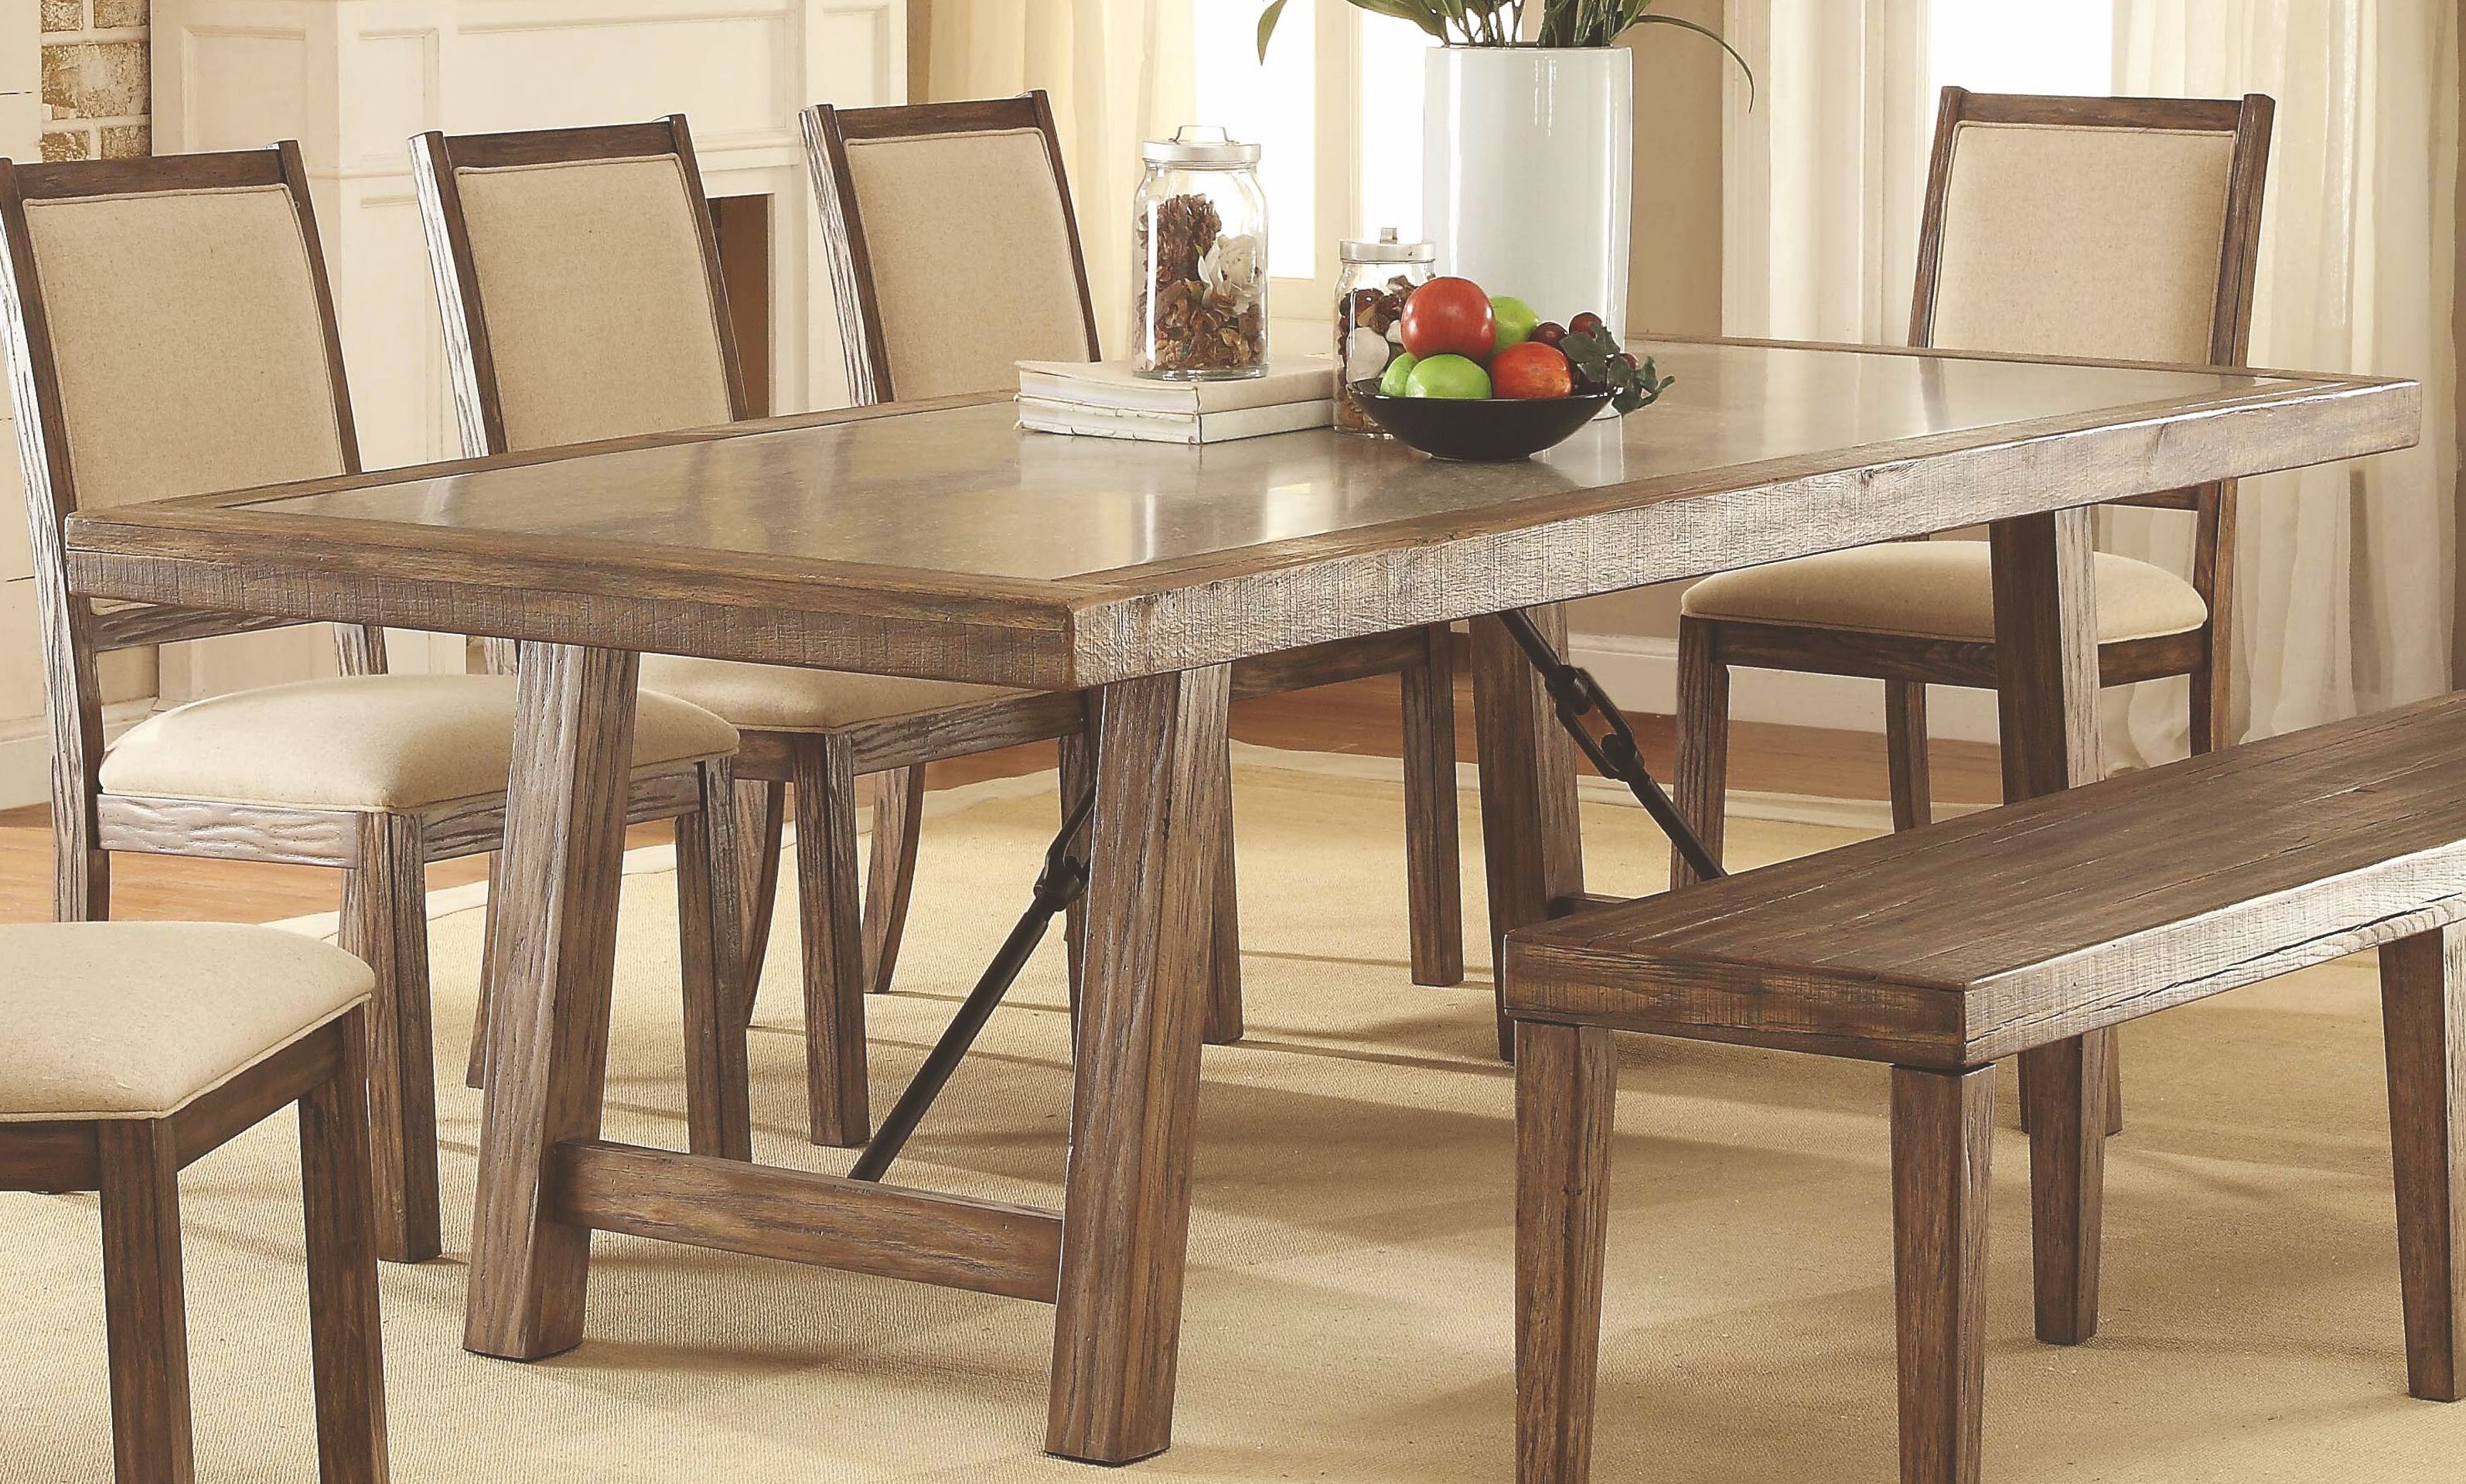 Unique Rustic Dining Table Set for Small Space